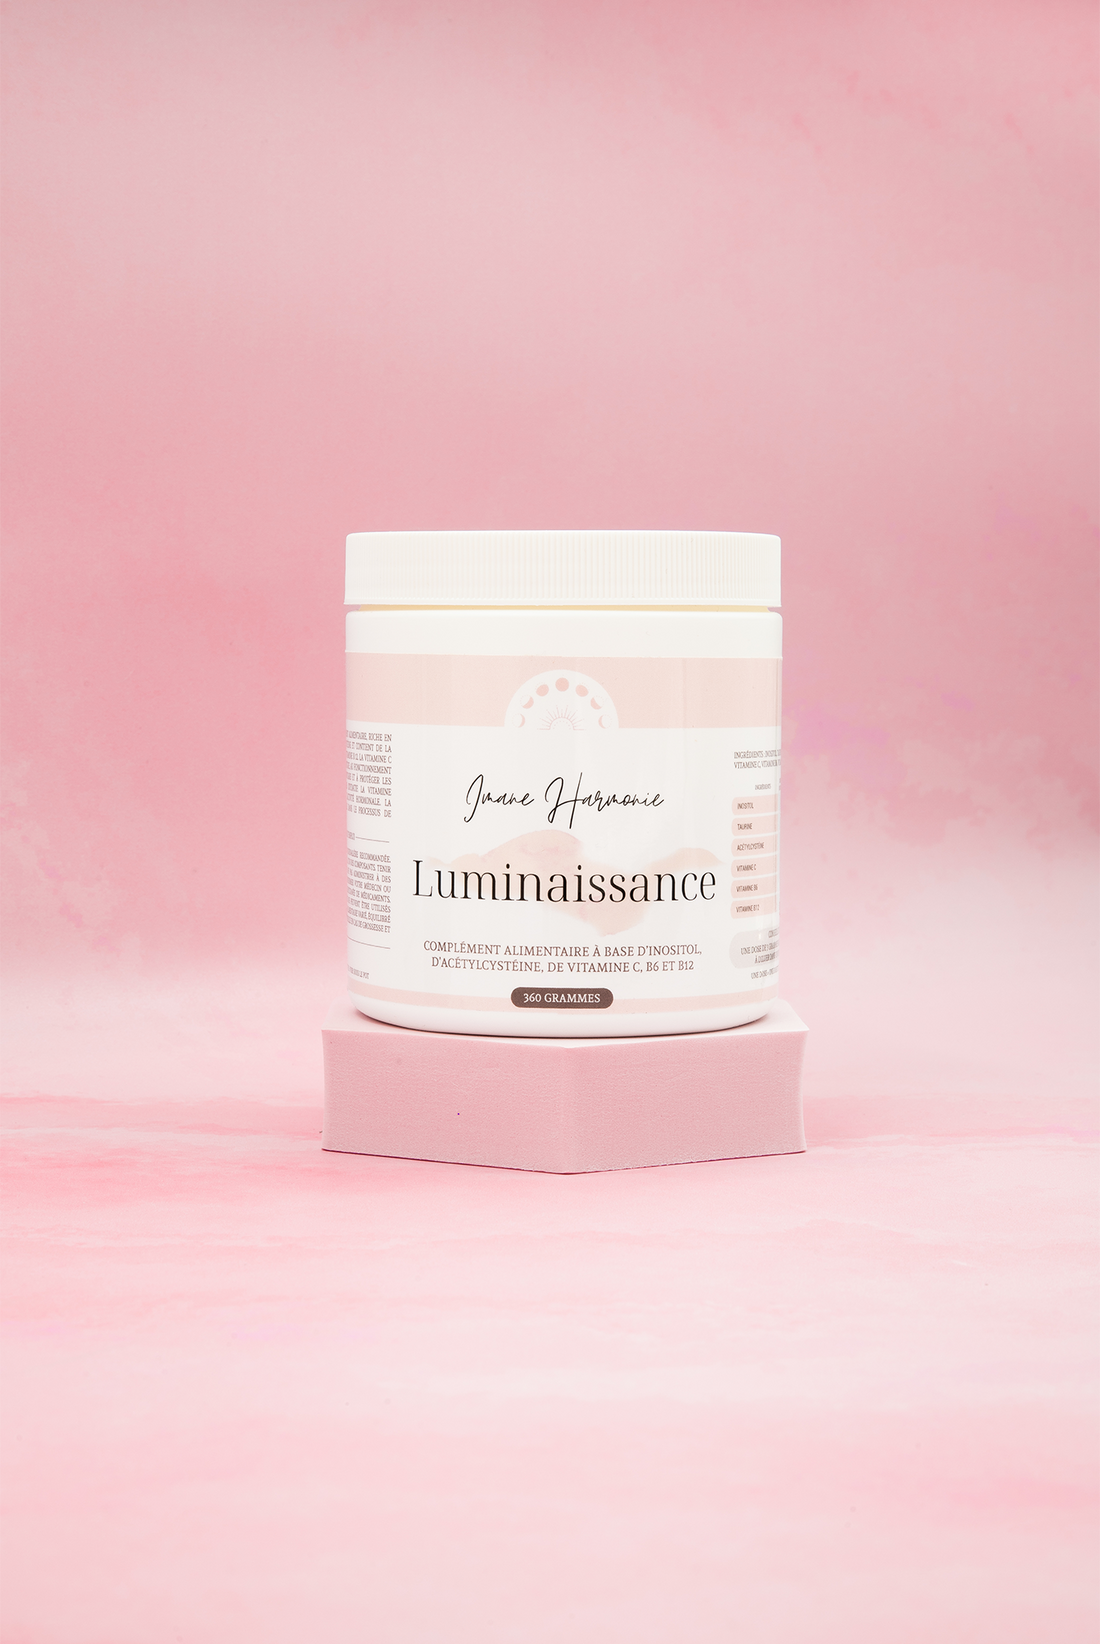 Luminaissance is a comprehensive and innovative dietary supplement designed to help you regain balance and ensure well-being throughout the menstrual cycle 